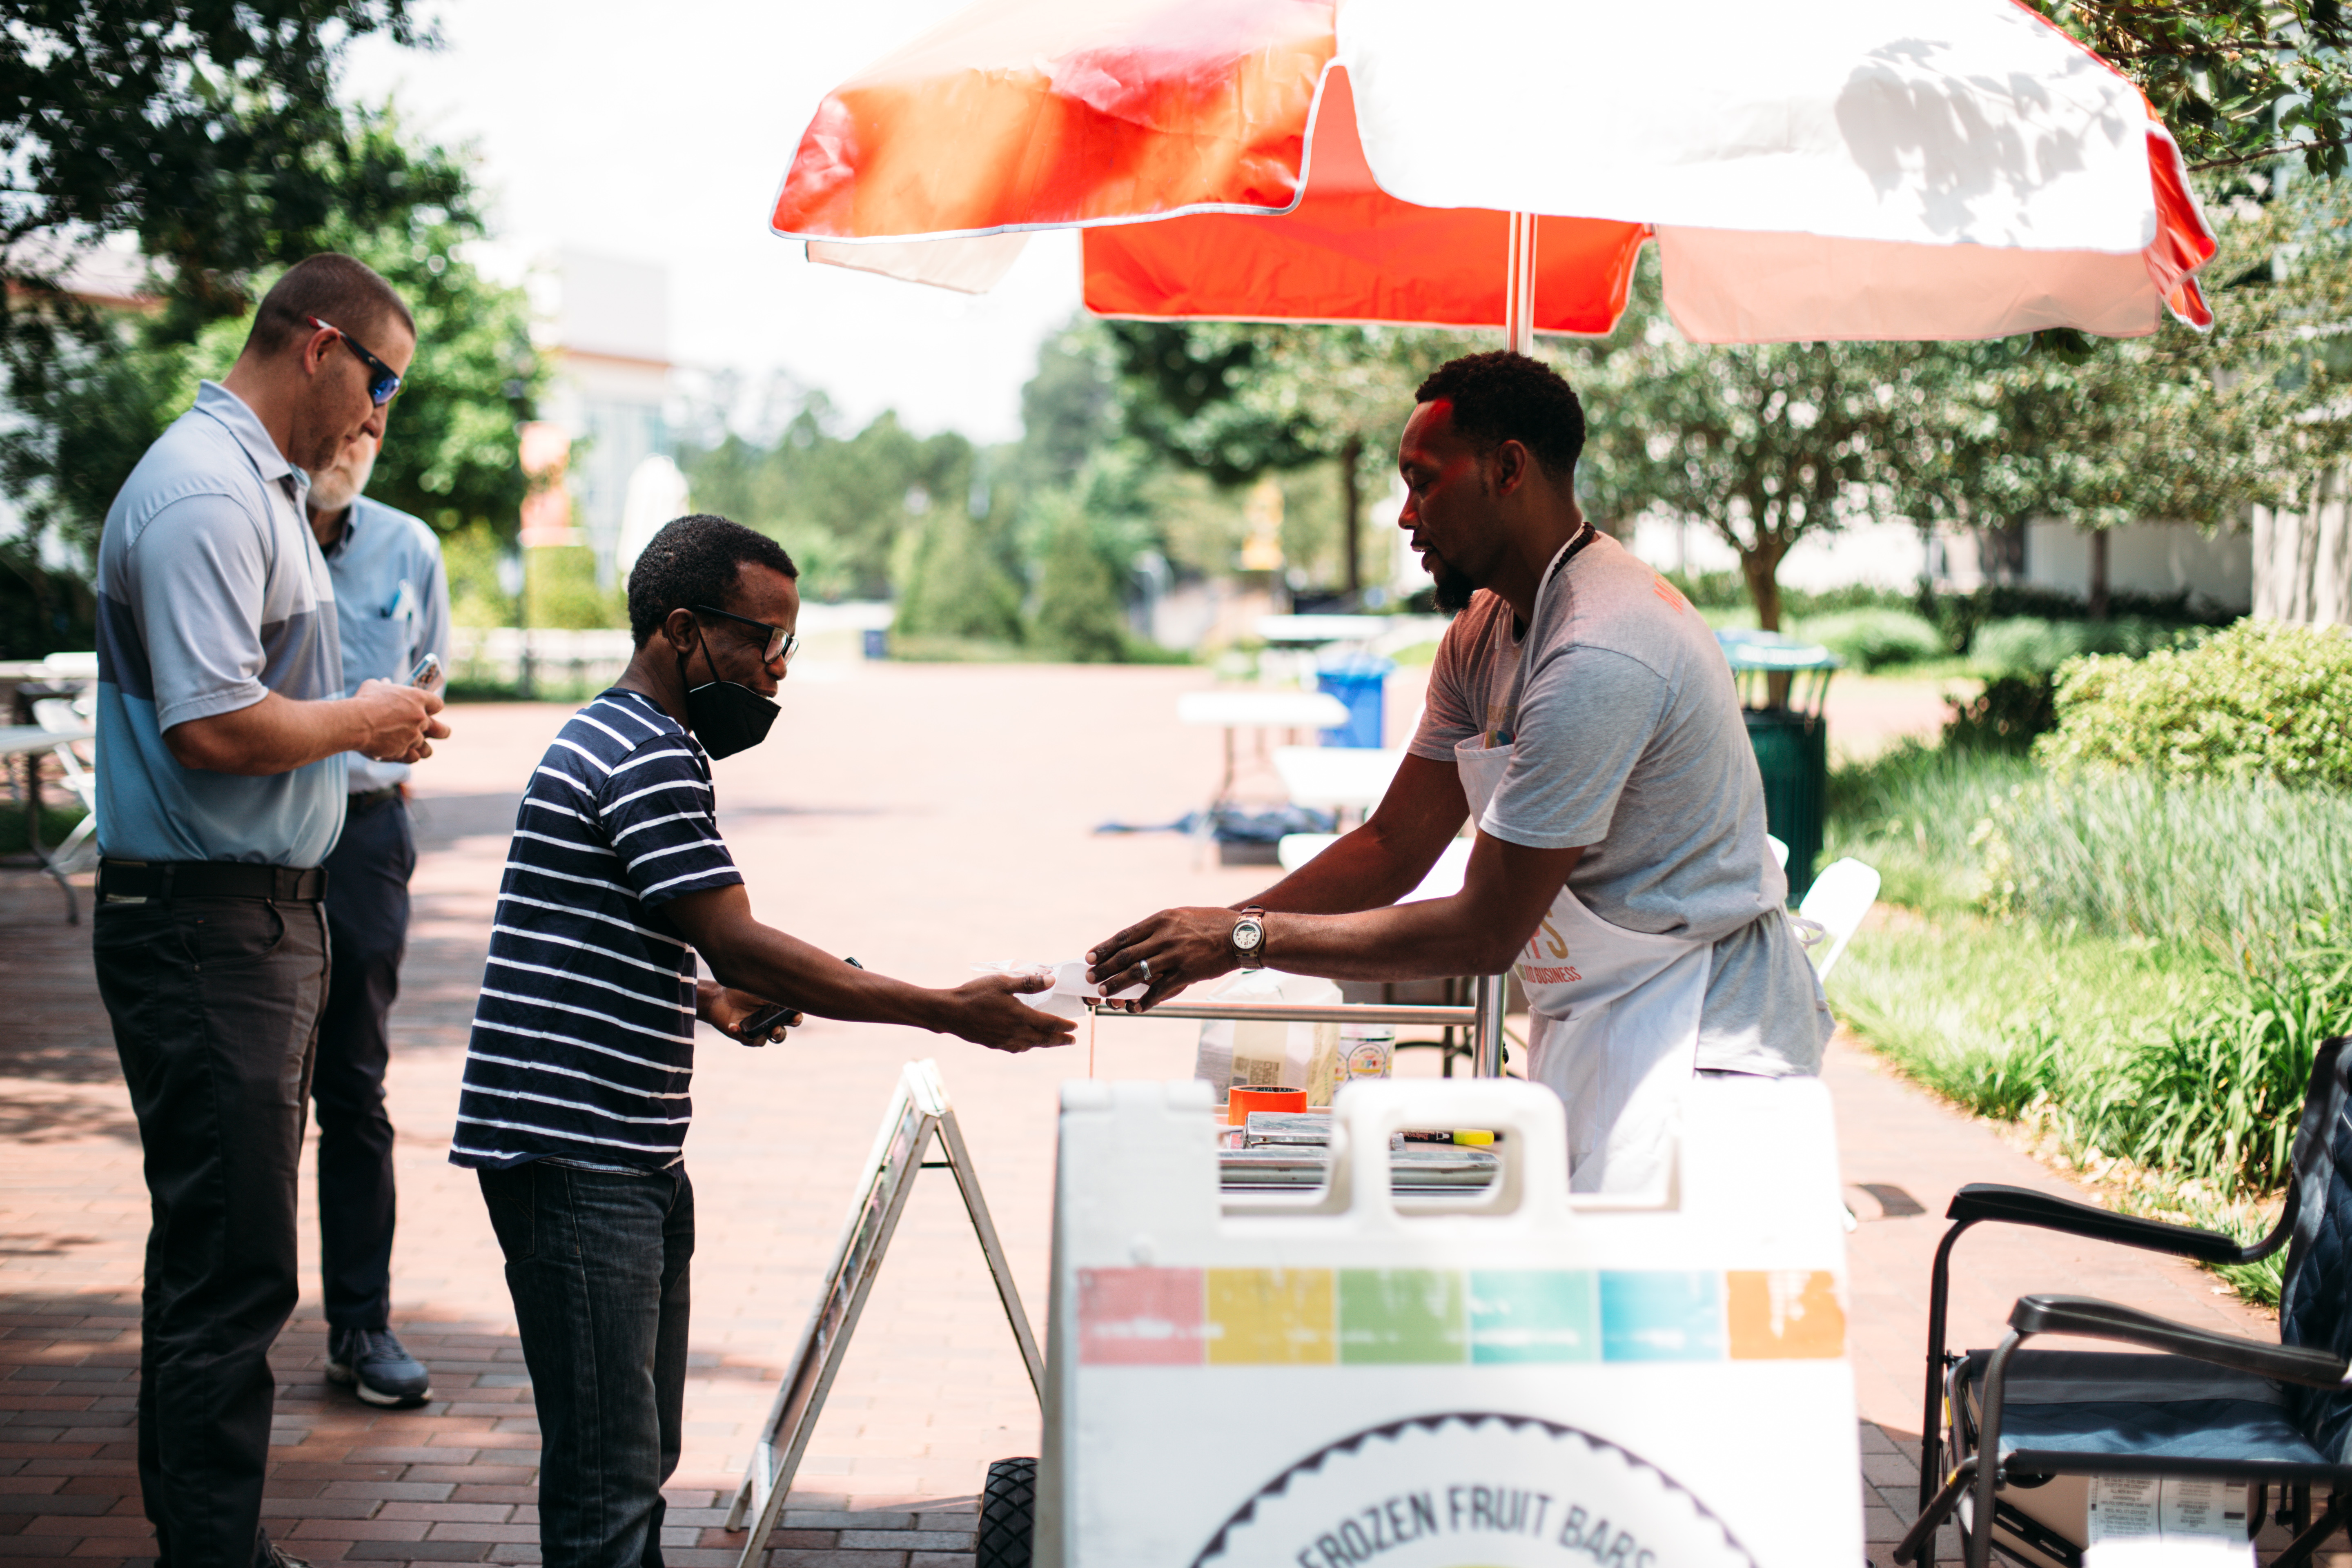 Man stands behind popsicle cart and hands another man a popsicle